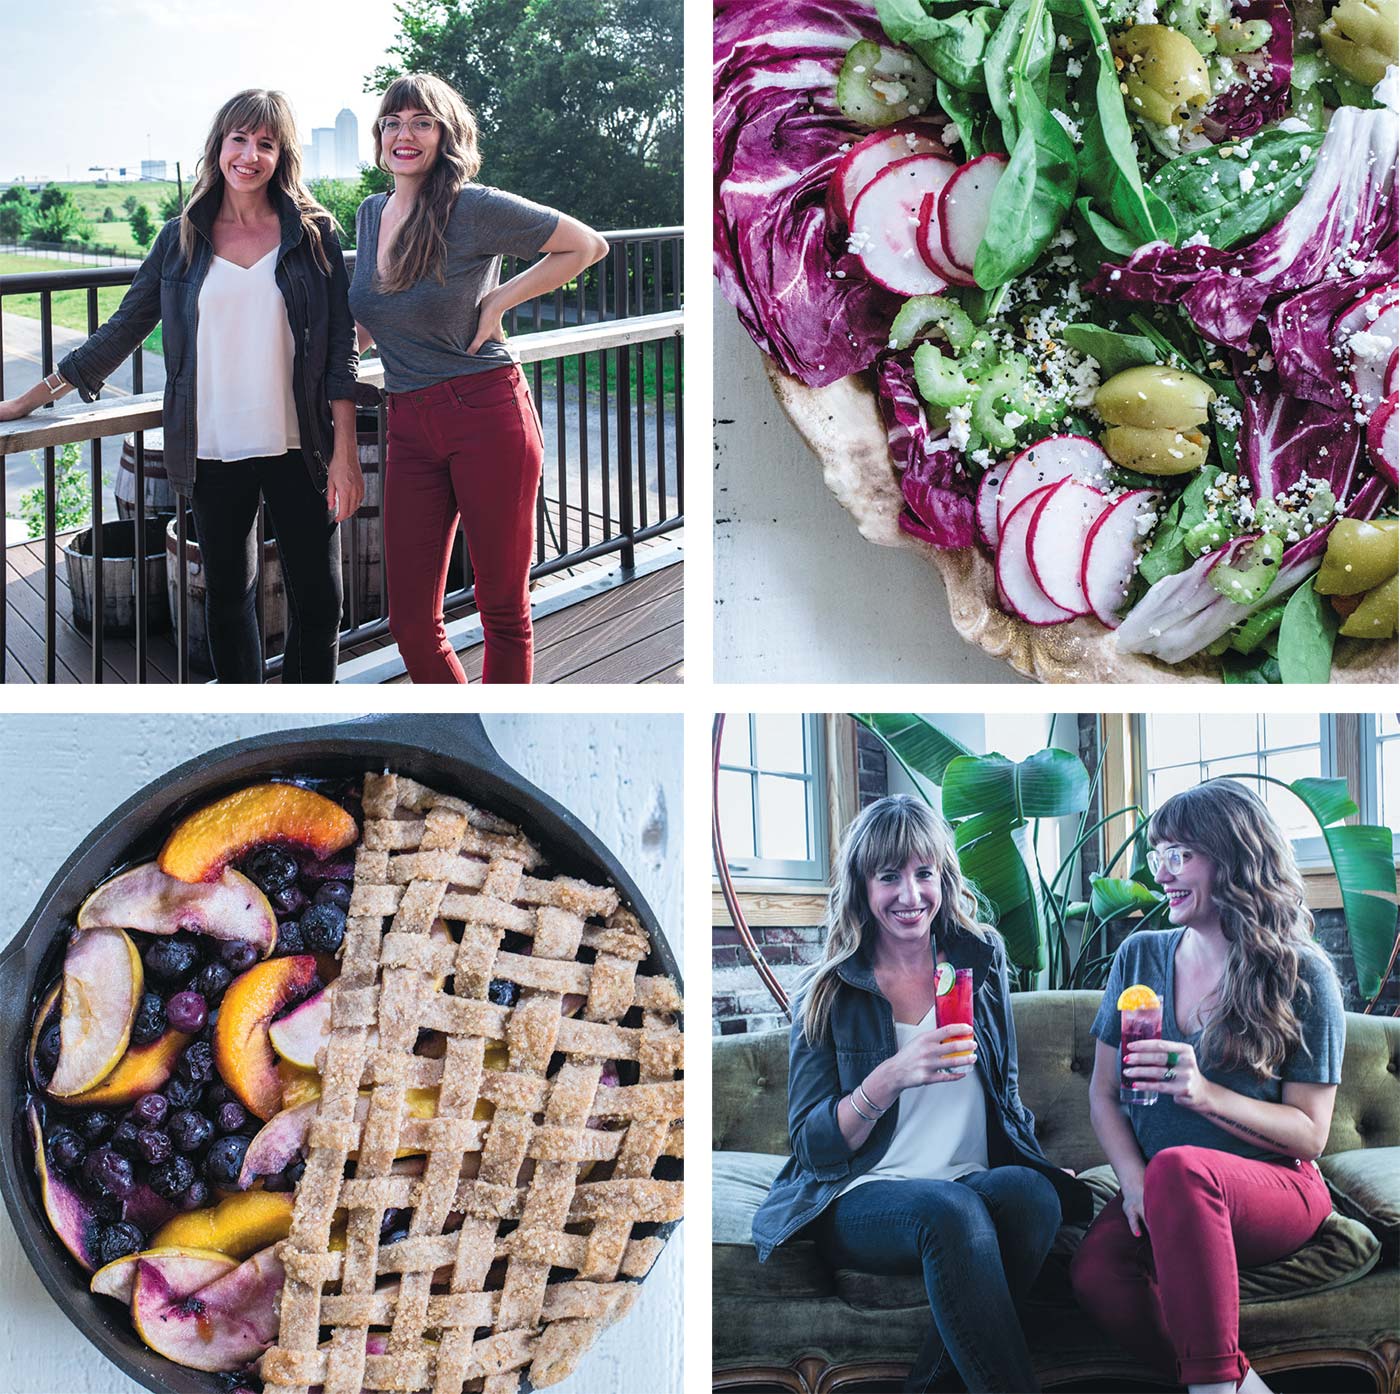 Co-founders of Indy Women in Food, Ashley Brooks and Sonja Overhiser